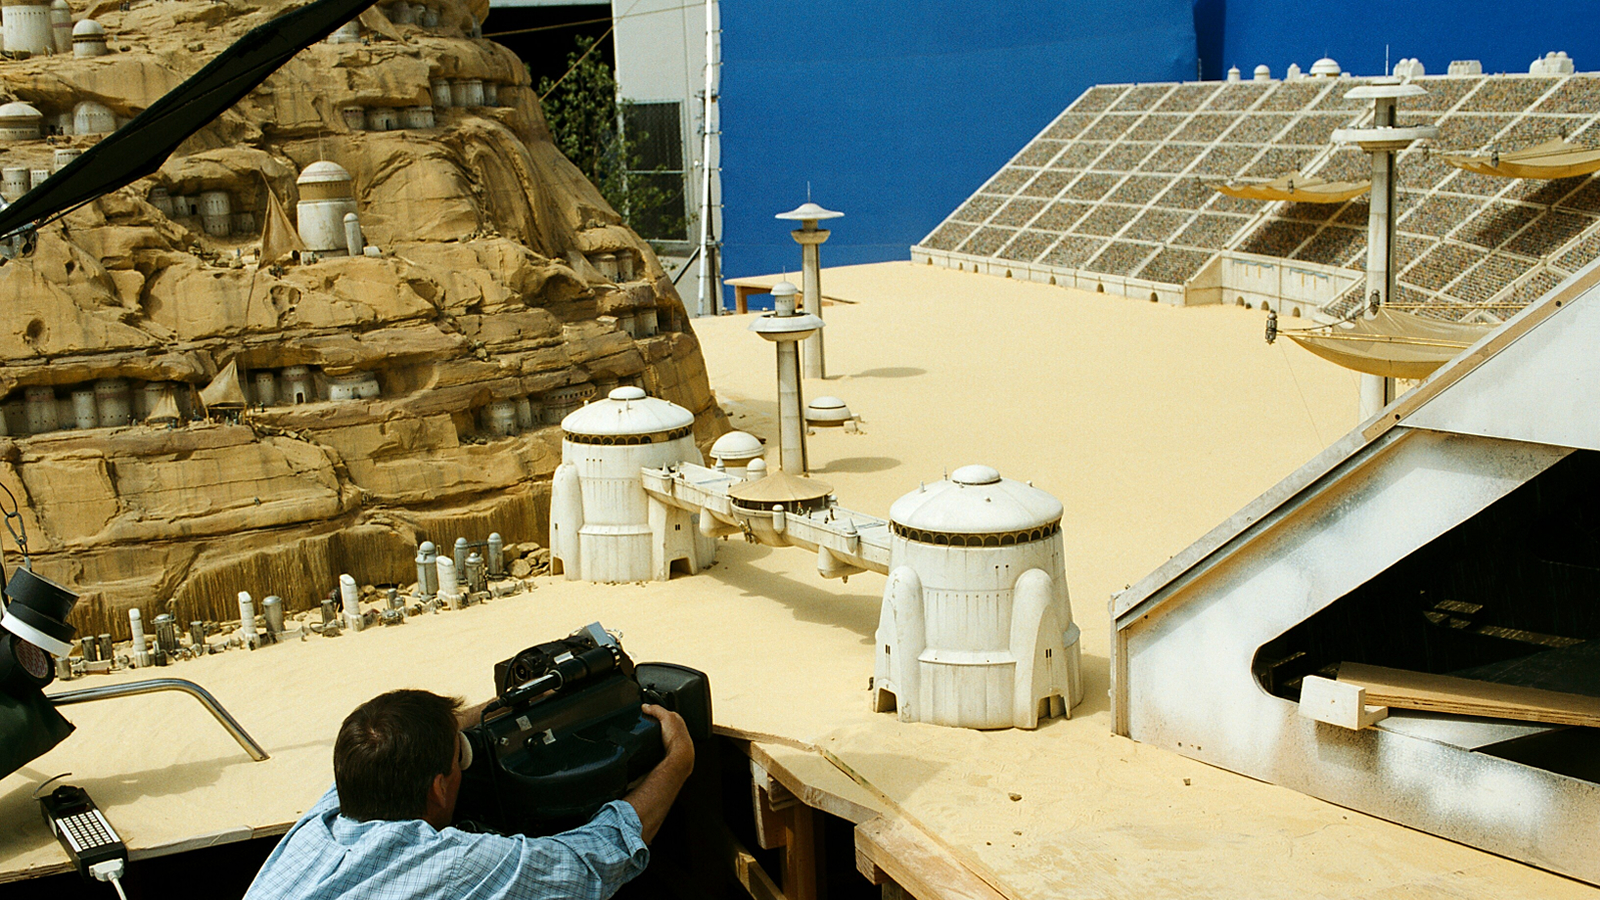 A behind the scenes still from Star Wars: The Phantom Menace showing the pod race arena miniature